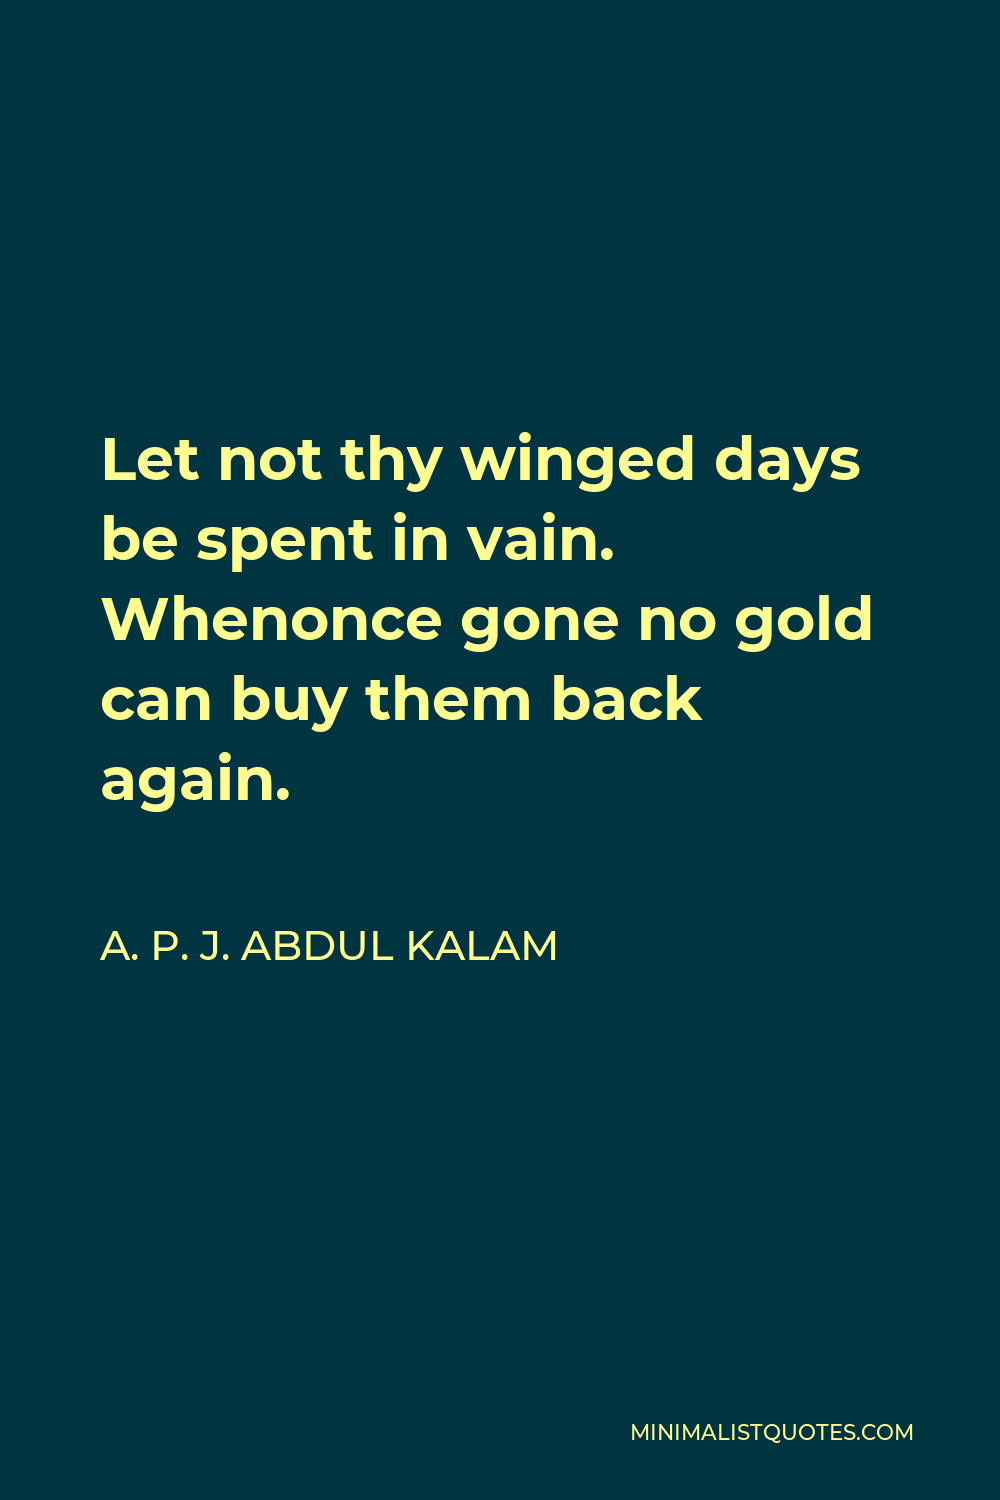 A. P. J. Abdul Kalam Quote - Let not thy winged days be spent in vain. Whenonce gone no gold can buy them back again.